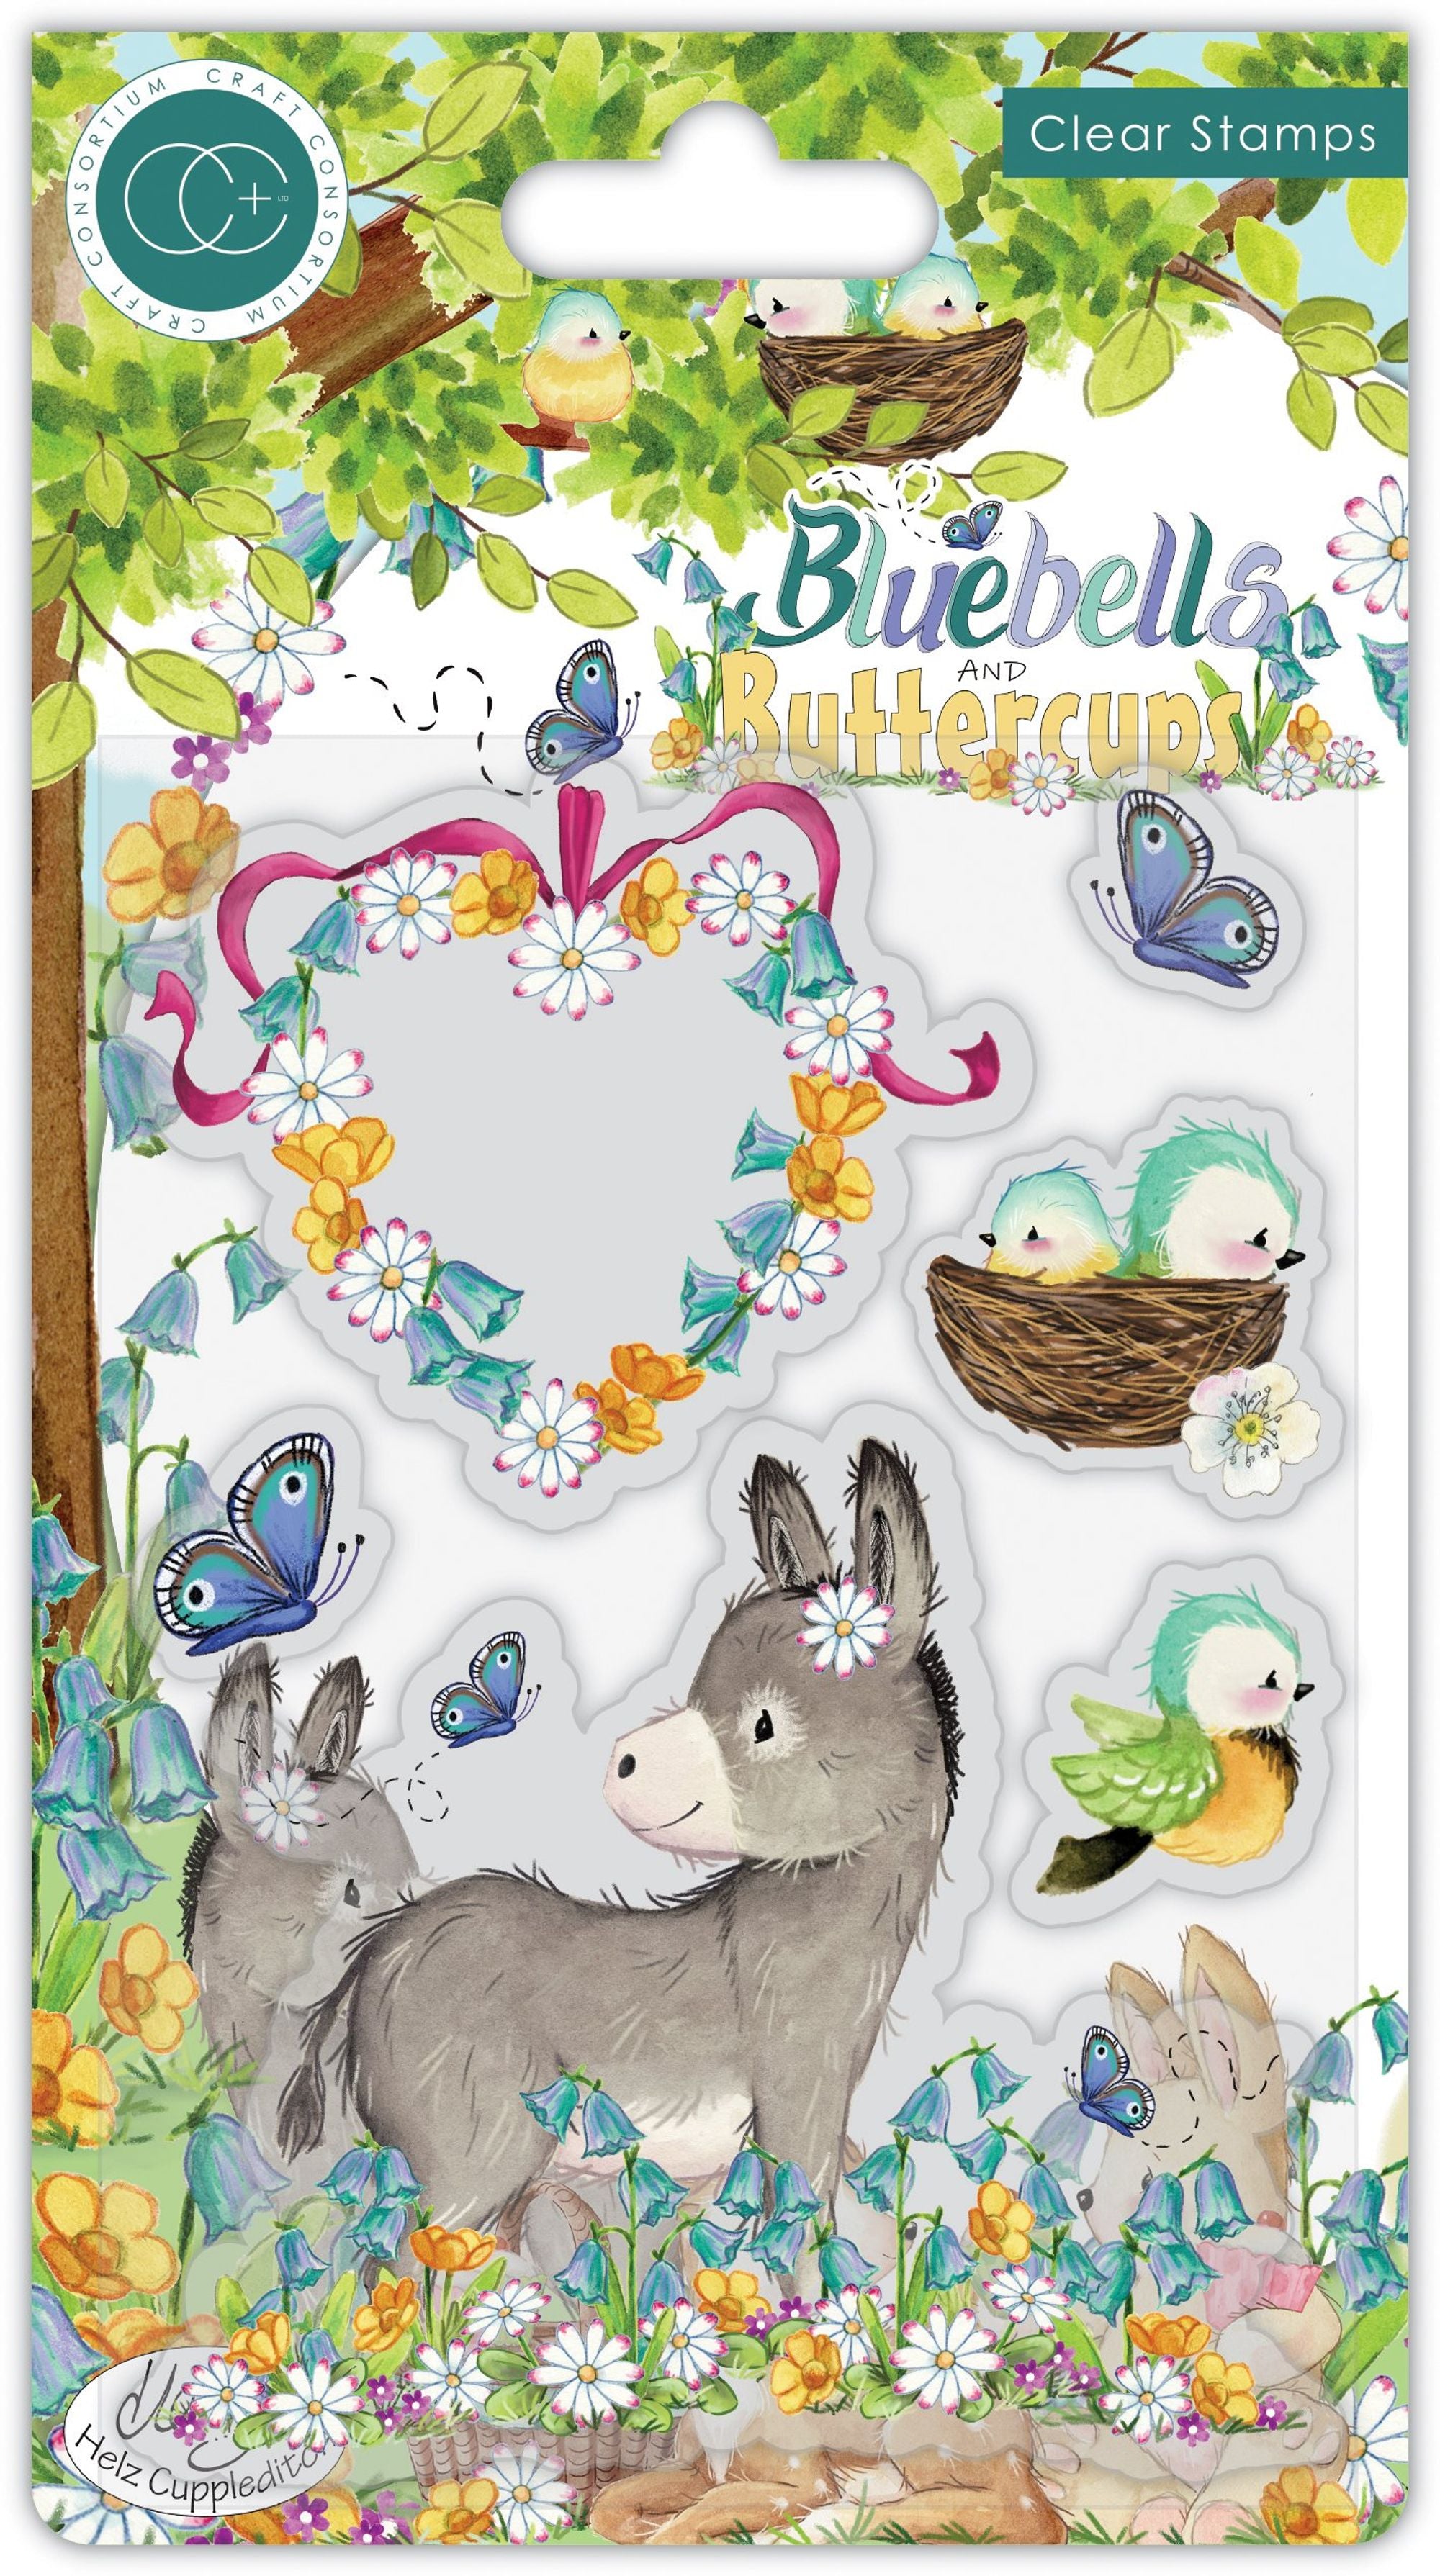 Bluebells and Buttercups - Stamp Set - Donkey